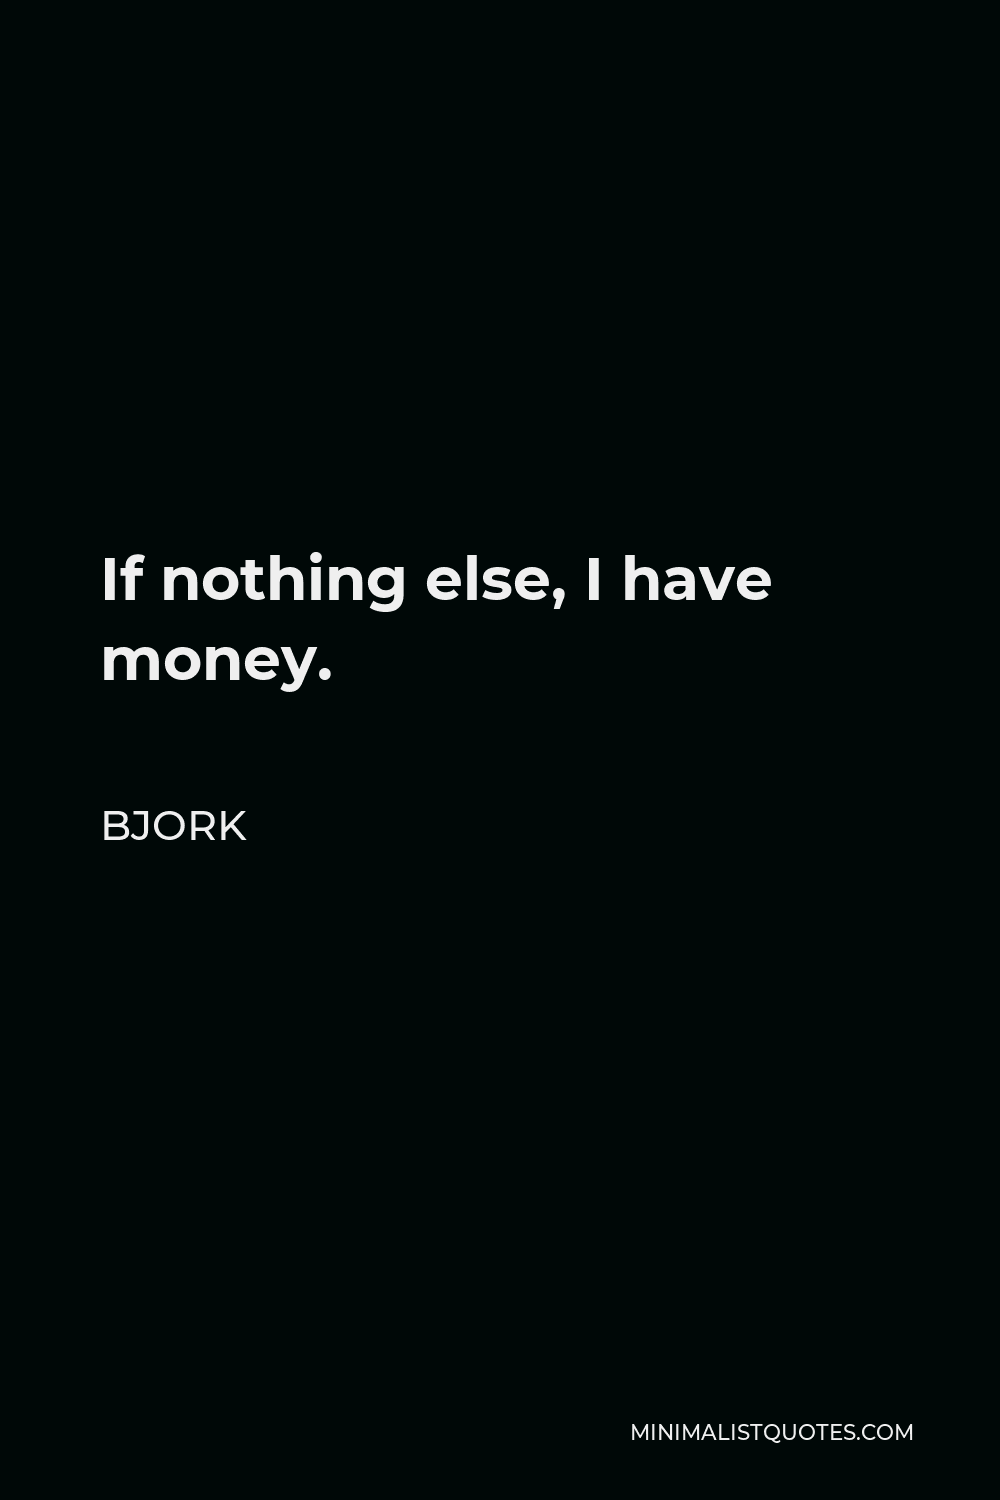 Bjork Quote - If nothing else, I have money.